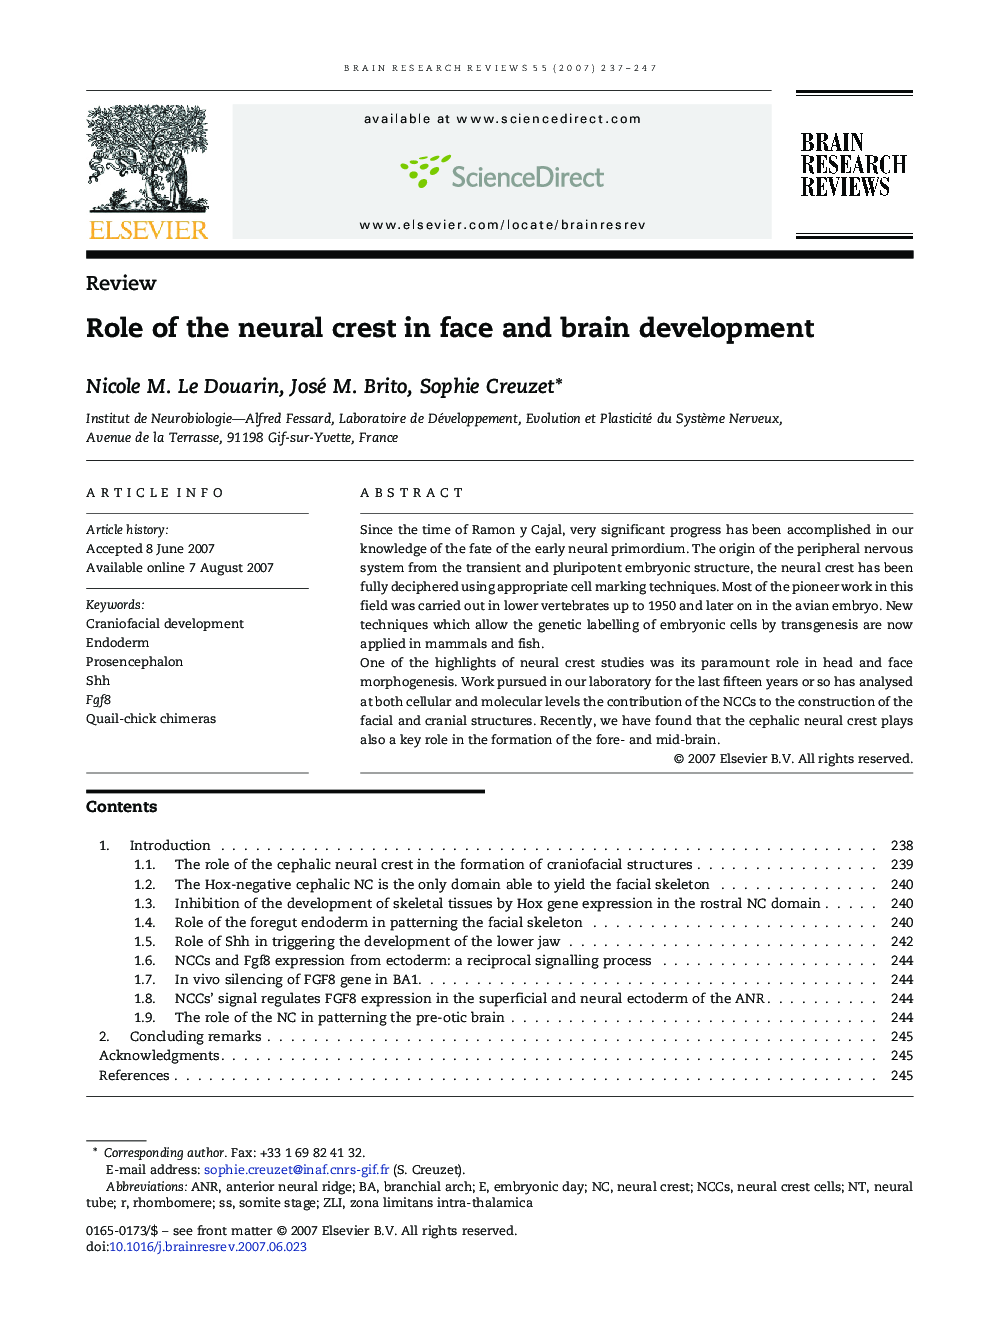 Role of the neural crest in face and brain development